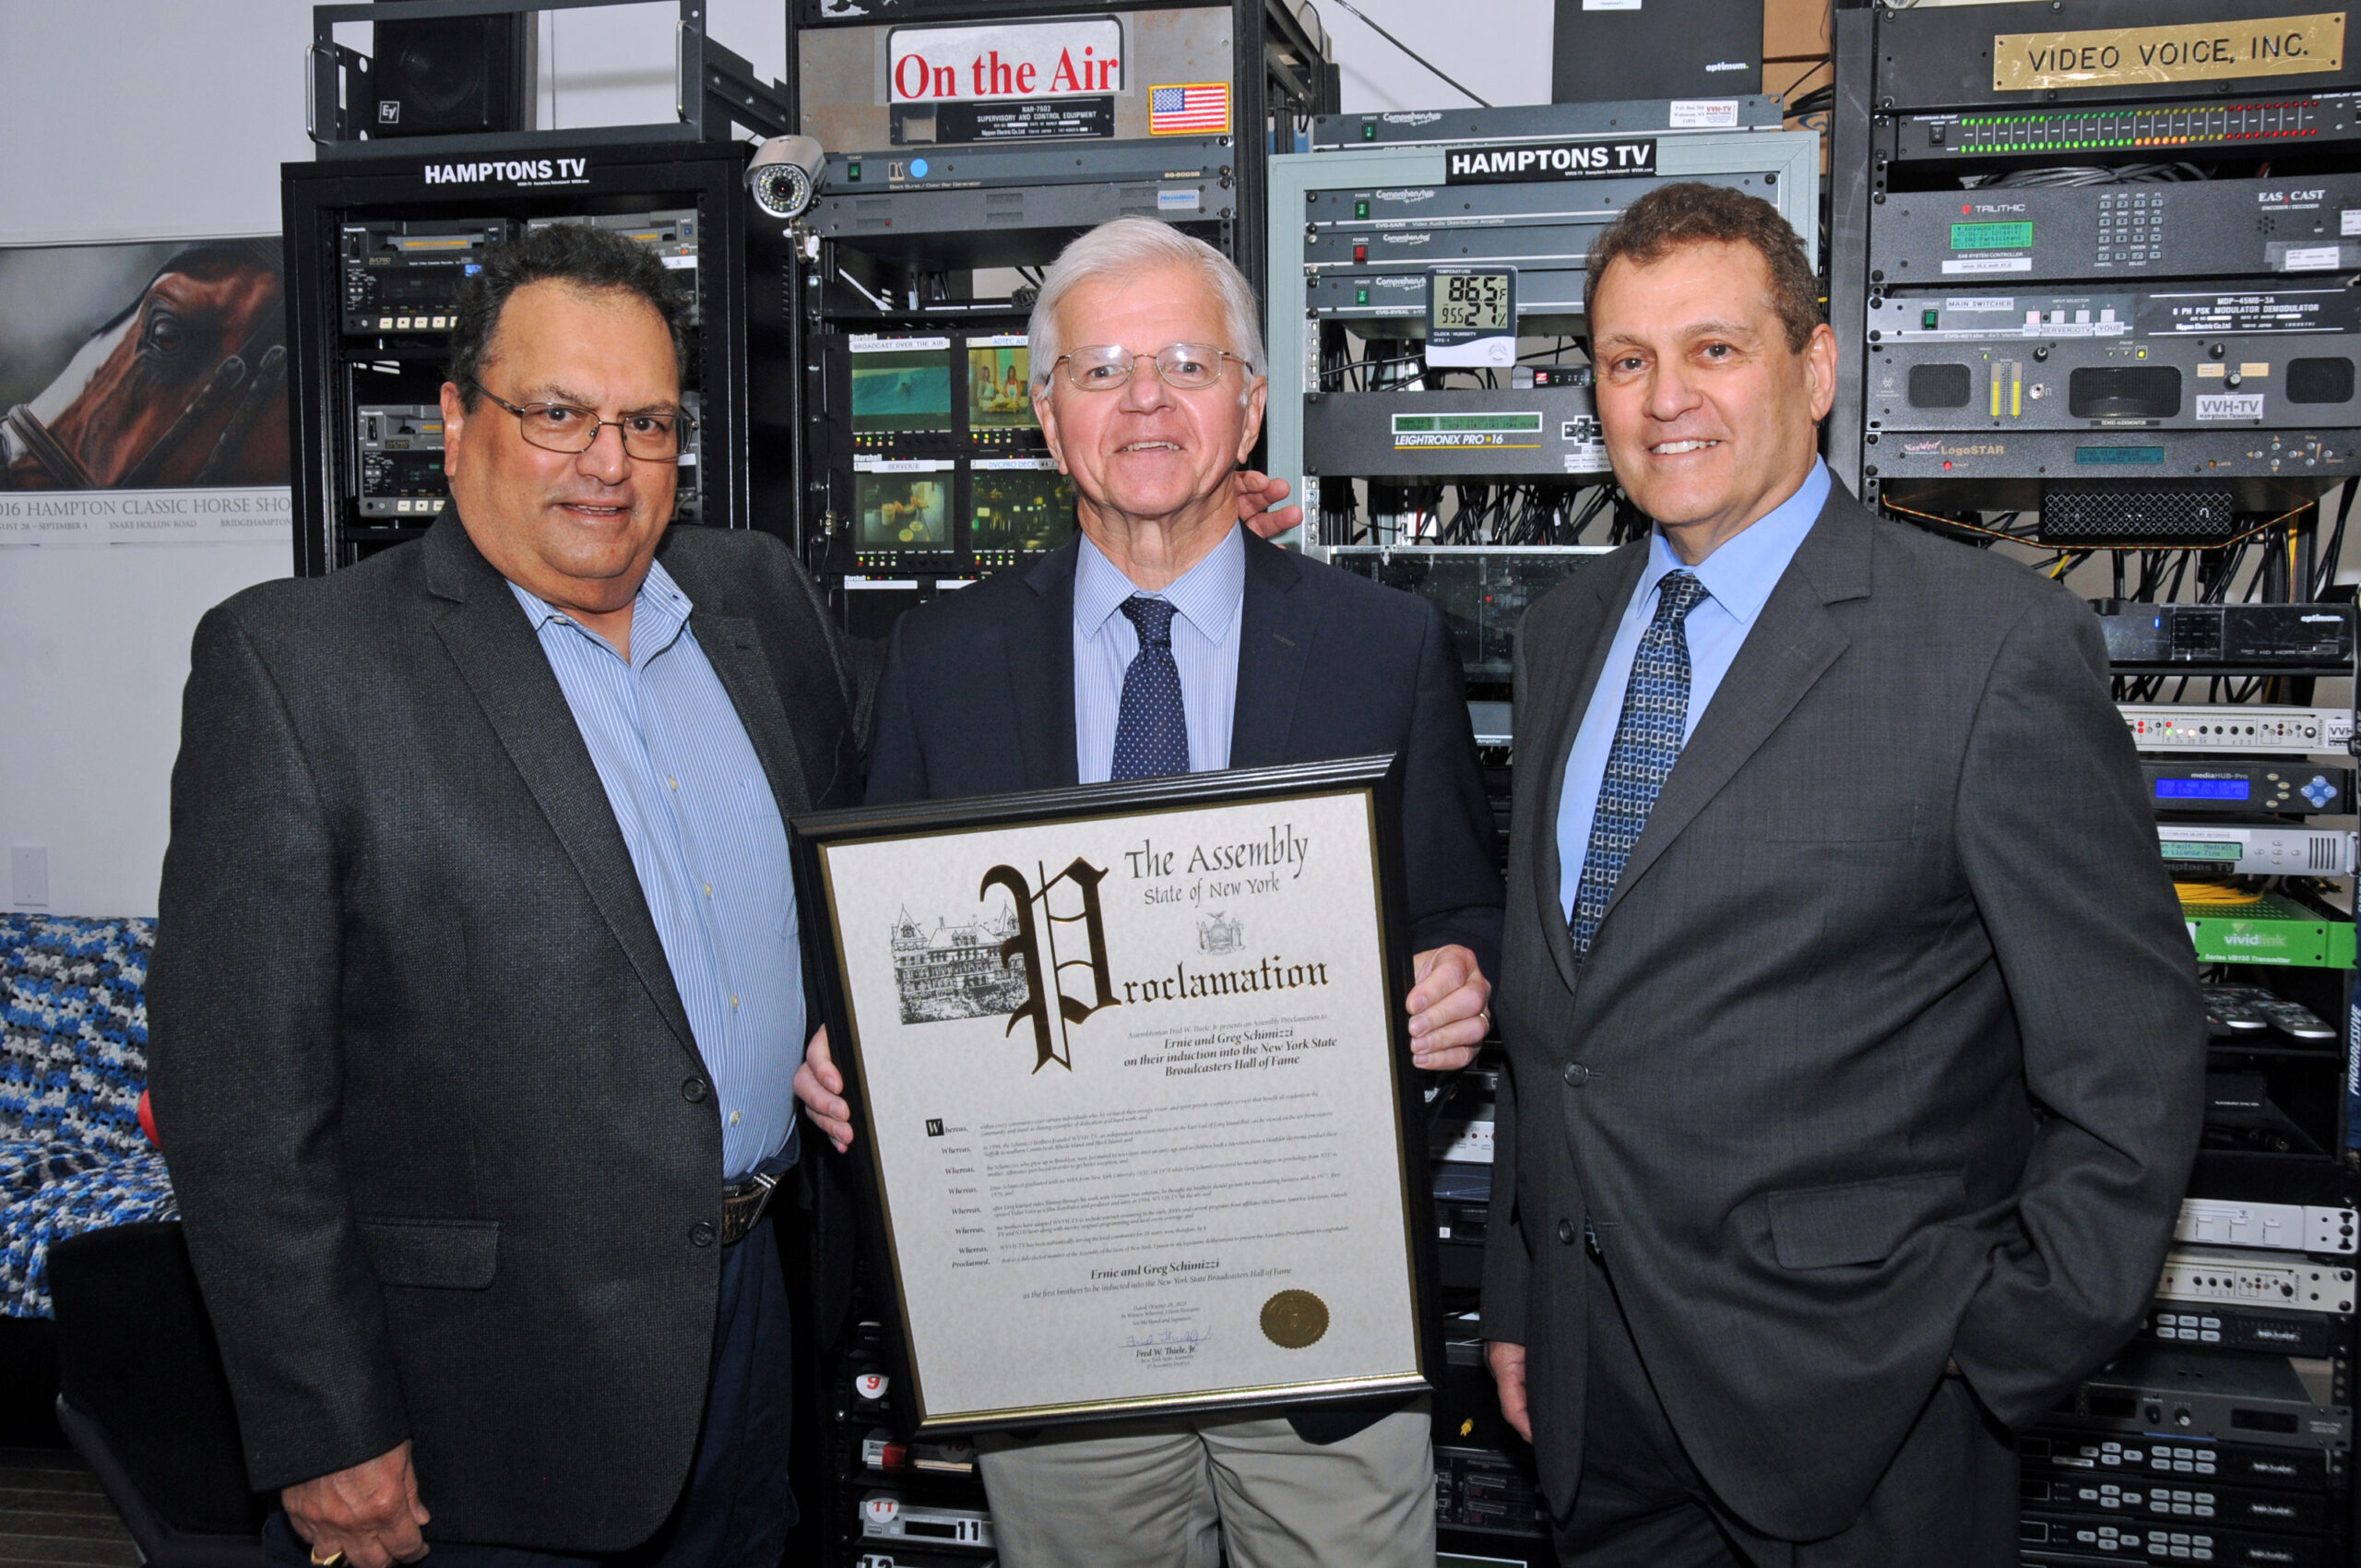 NYS Assembly Member Fred Thiele Jr., center, presented a proclamation to WVVH-TV founders and co-owners Ernie and Greg Schimizzi on Friday, in honor of their induction into the NYS Broadcasters Hall of Fame. They are the first brothers ever inducted.              RICHARD LEWIN